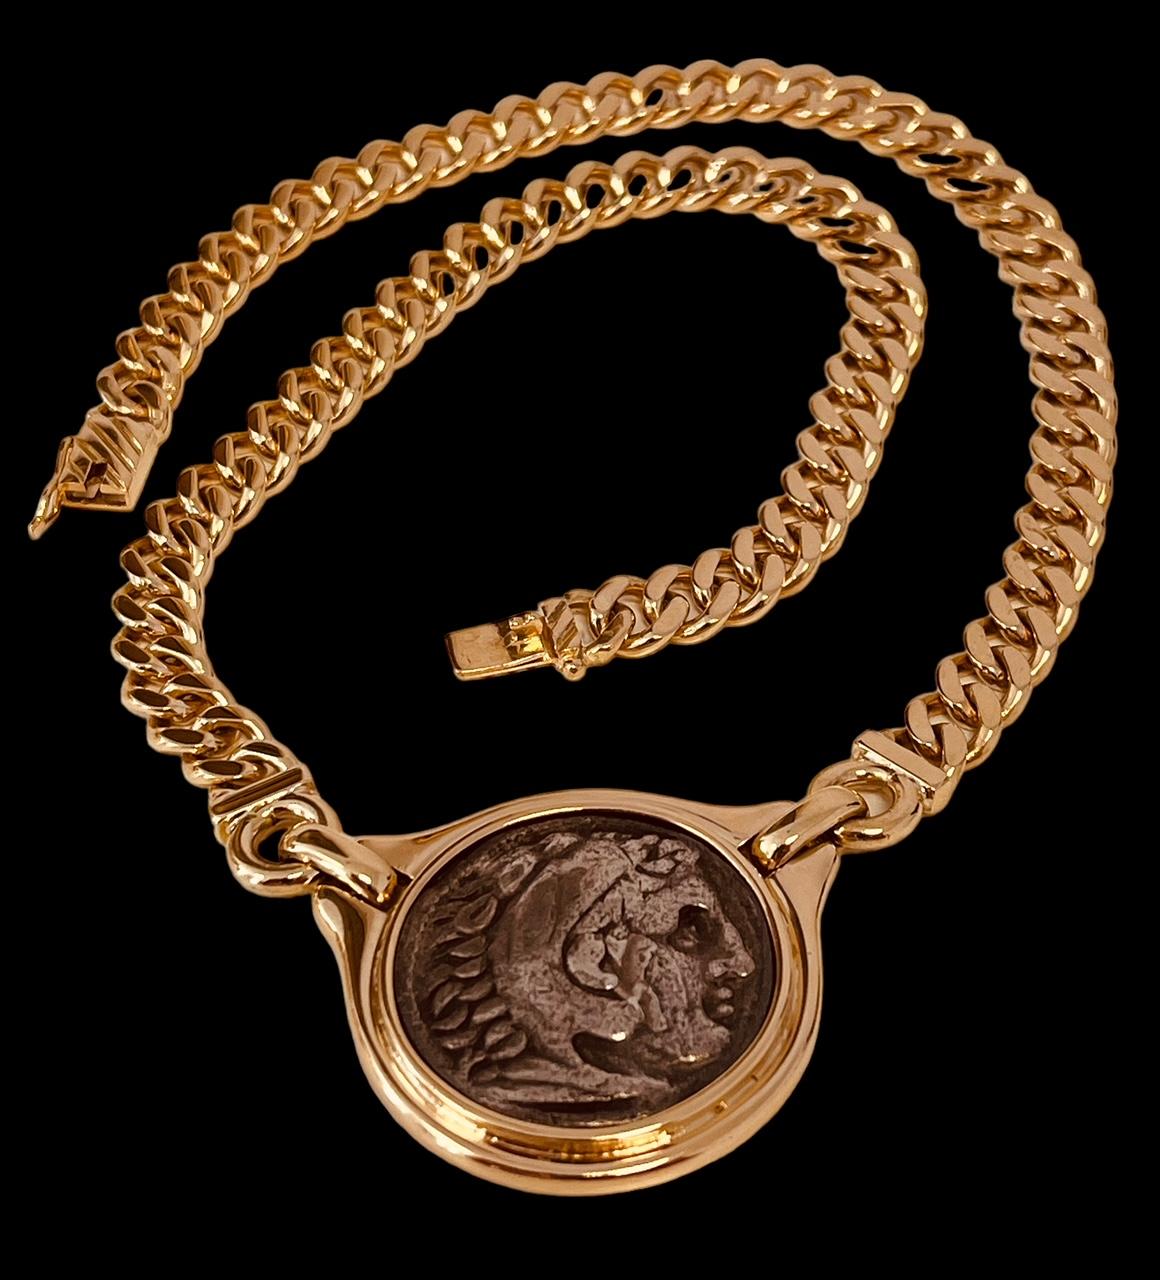 18ct Gold Link Necklace Centring A Reproduction Of An Antique Greek Silver Coin For Sale 6